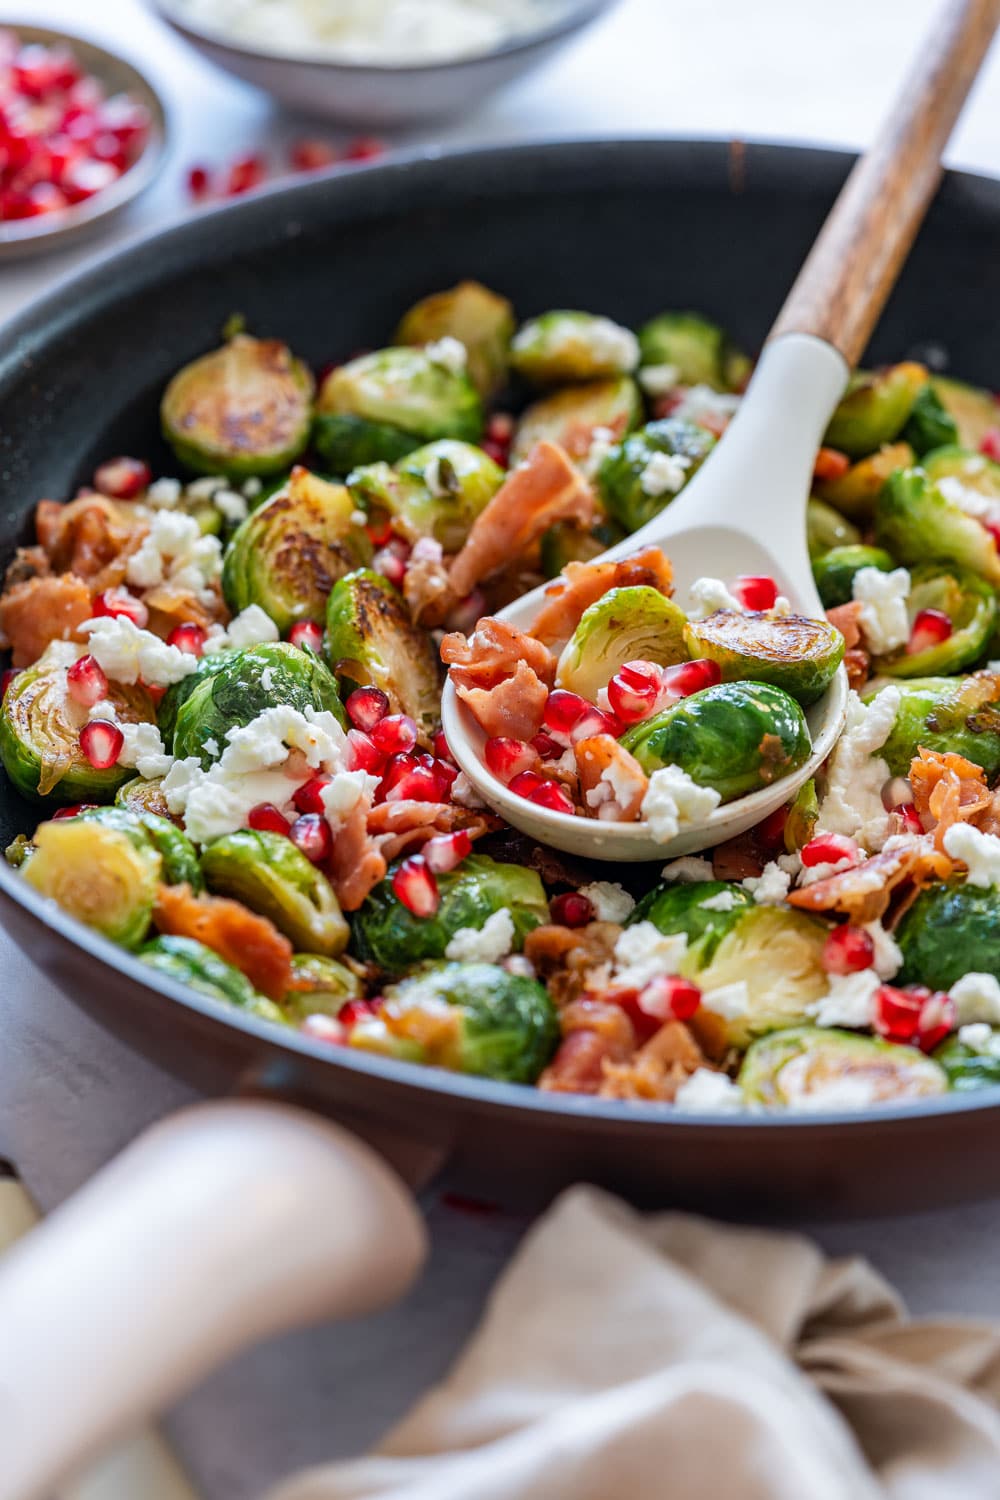 Roasted Brussels sprouts salad with prosciutto and pomegranate.